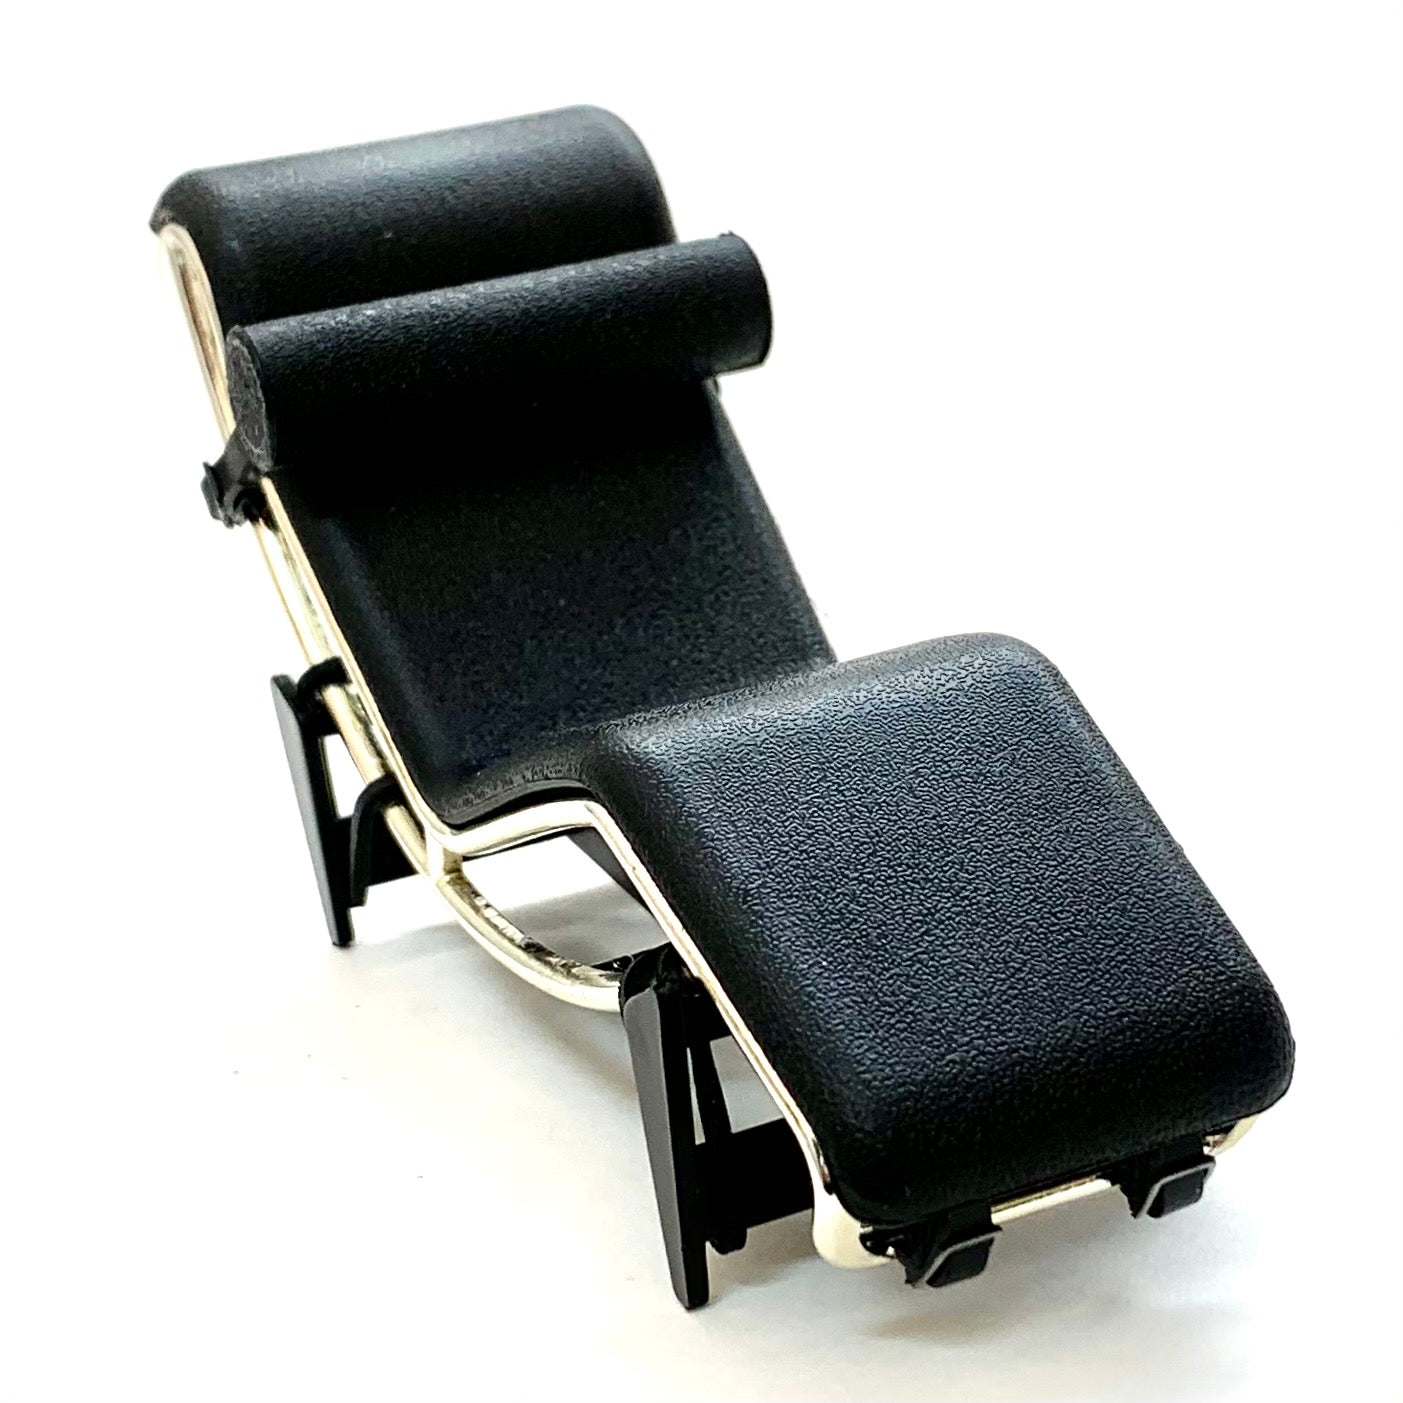 X 75137 LC4/Chaise Lounge chair-DISCONTINUED